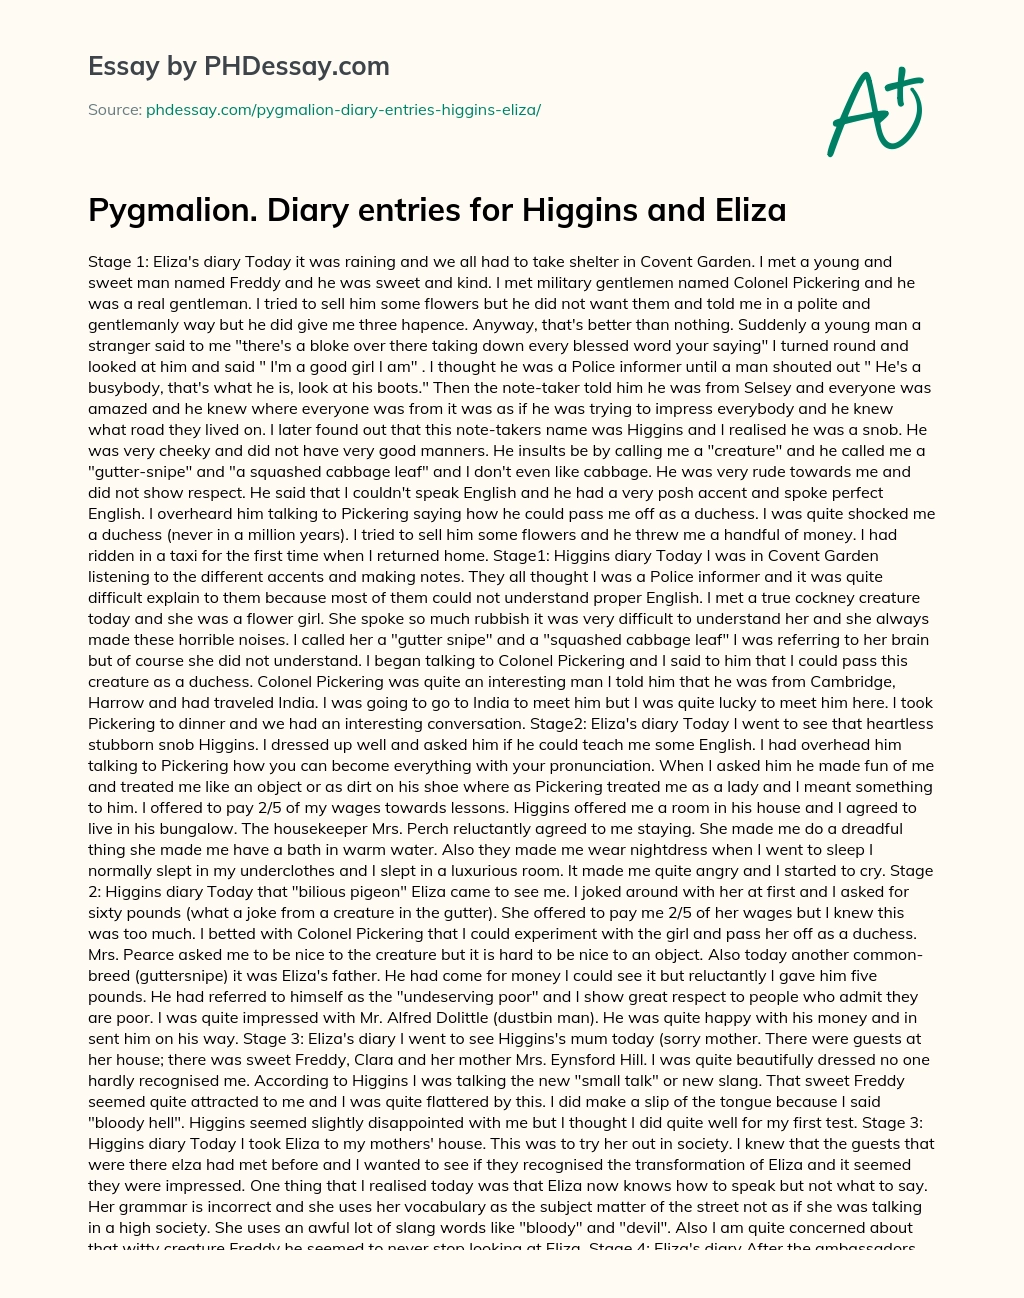 Pygmalion. Diary entries for Higgins and Eliza essay